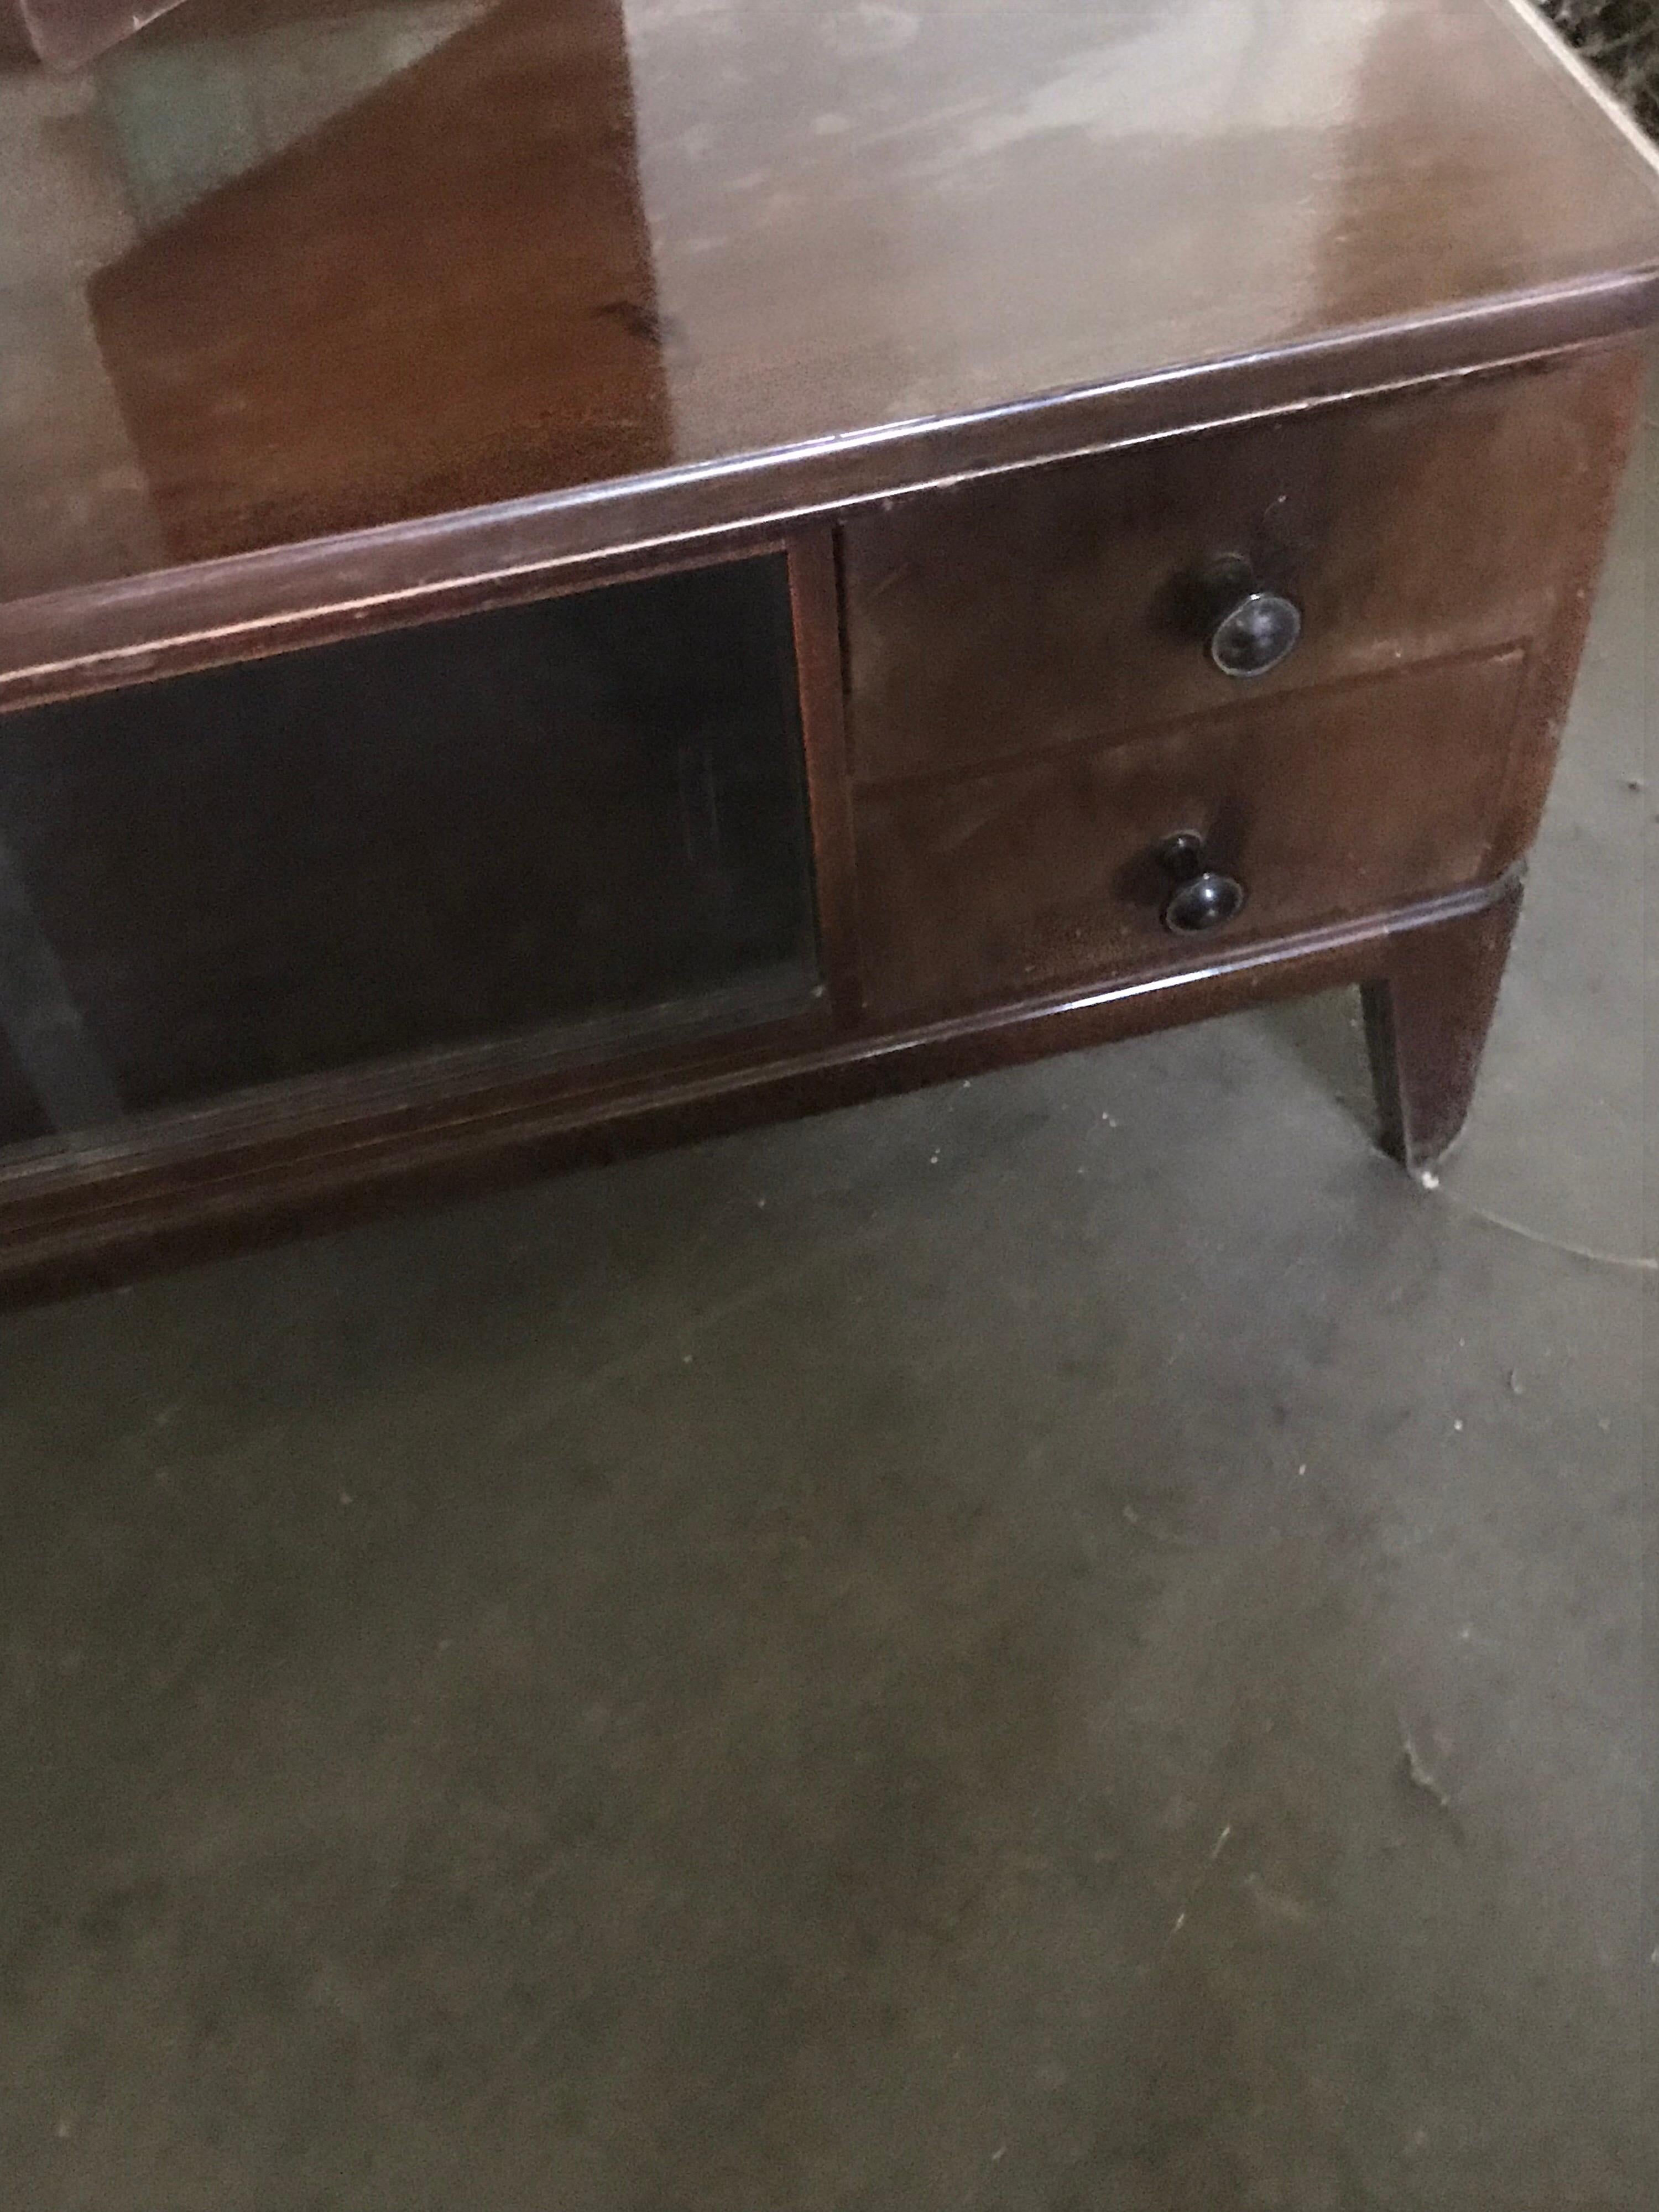 Art Deco dressing table or vanity.
A beautiful walnut veneered, genuine Art Deco dressing table or vanity
1950s Art Deco vanity. Original period handles. Ready to use.